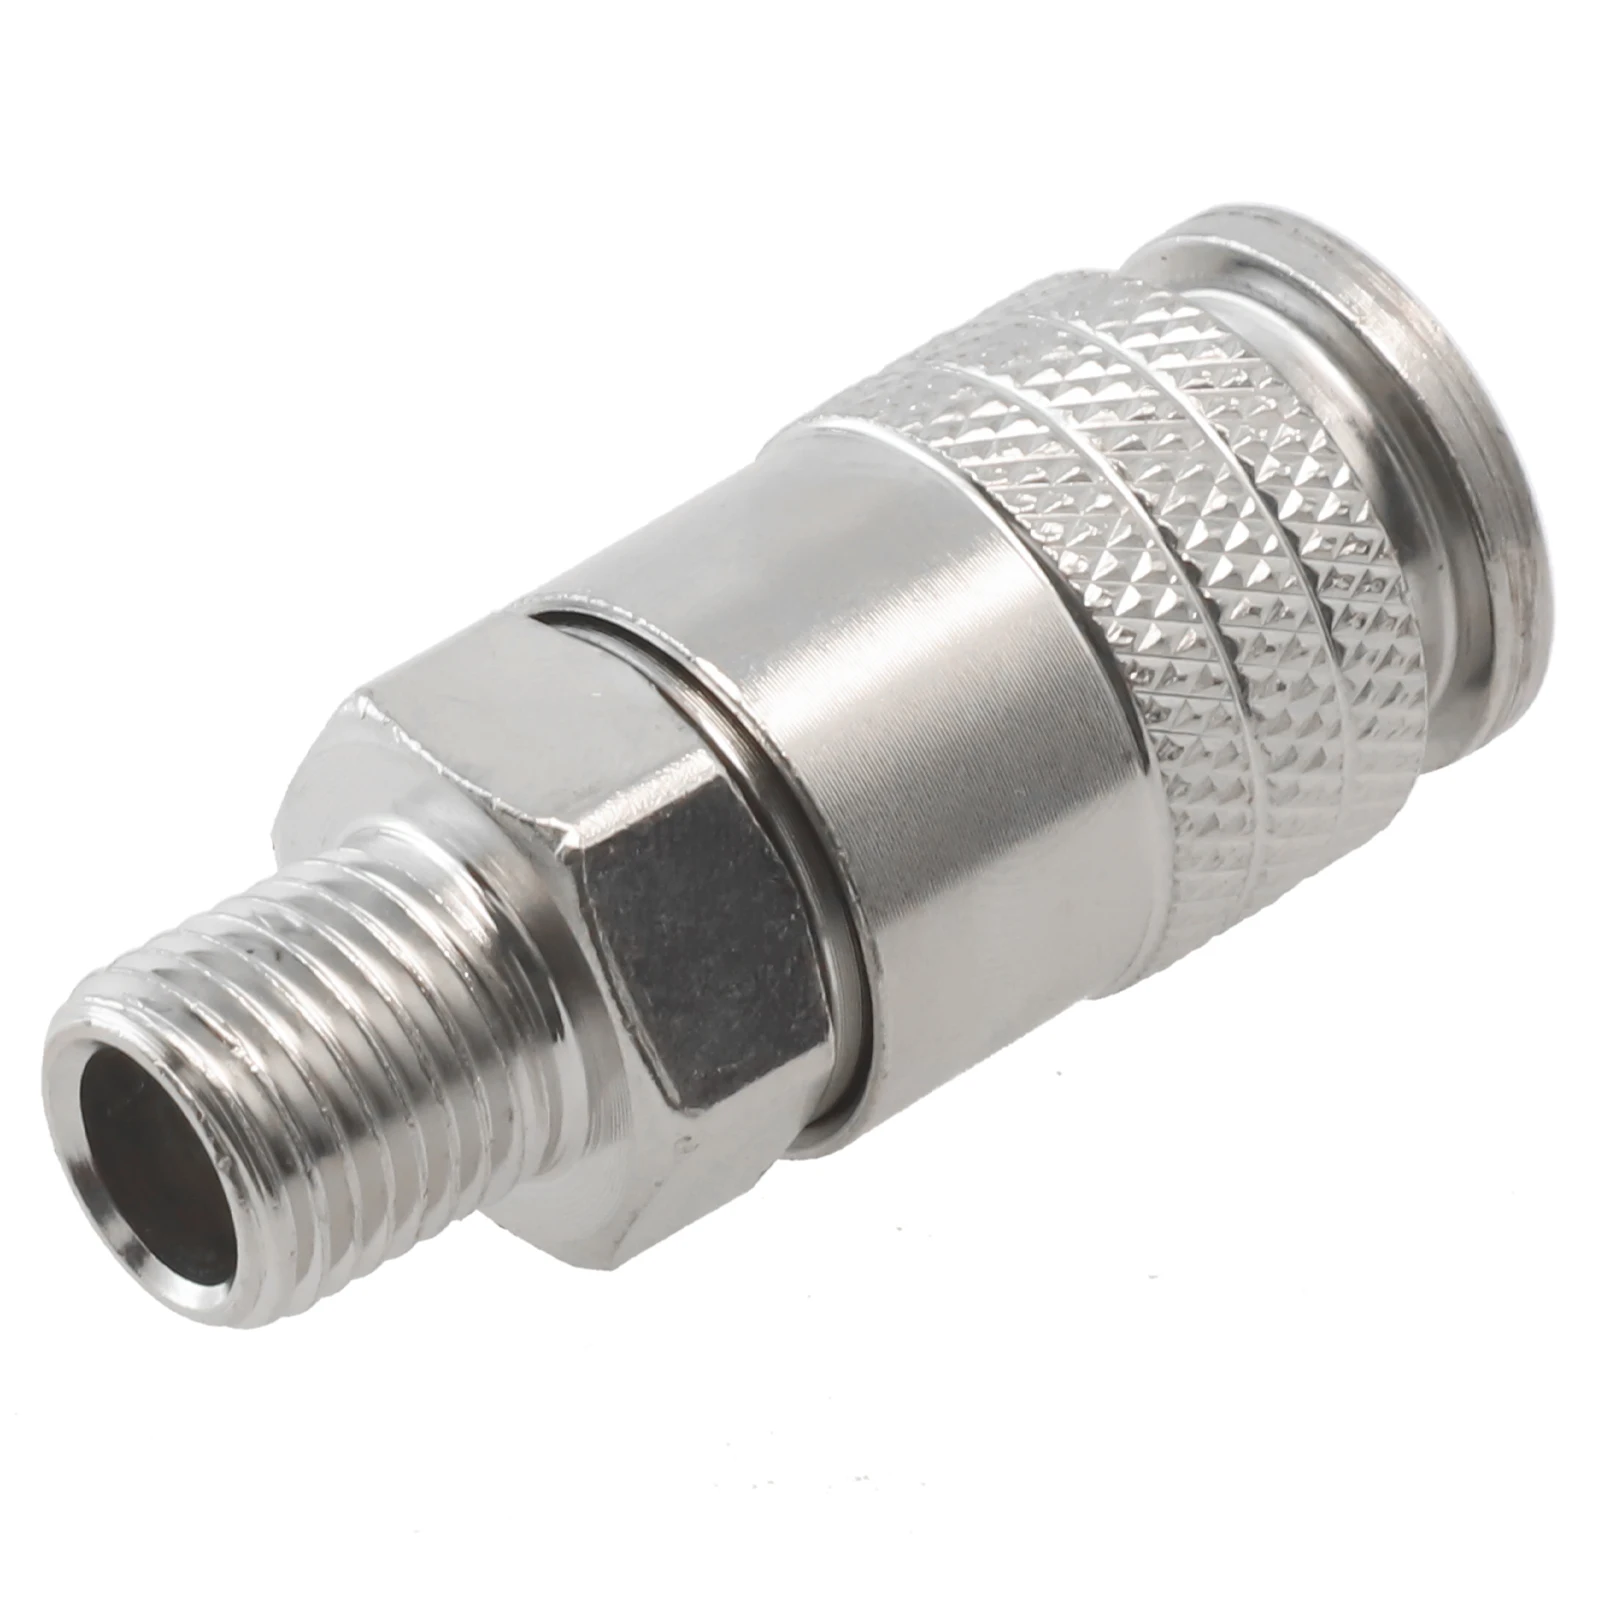 Pneumatic Fitting G1/4 Male Thread EU Standard Quick Connector For Air Compressor 53mm Length Air Compressor Tool Parts new aluminum alloy linear track adjustable grinding tool maximum clamping 53mm tool whetstone grinding tools woodworking tool